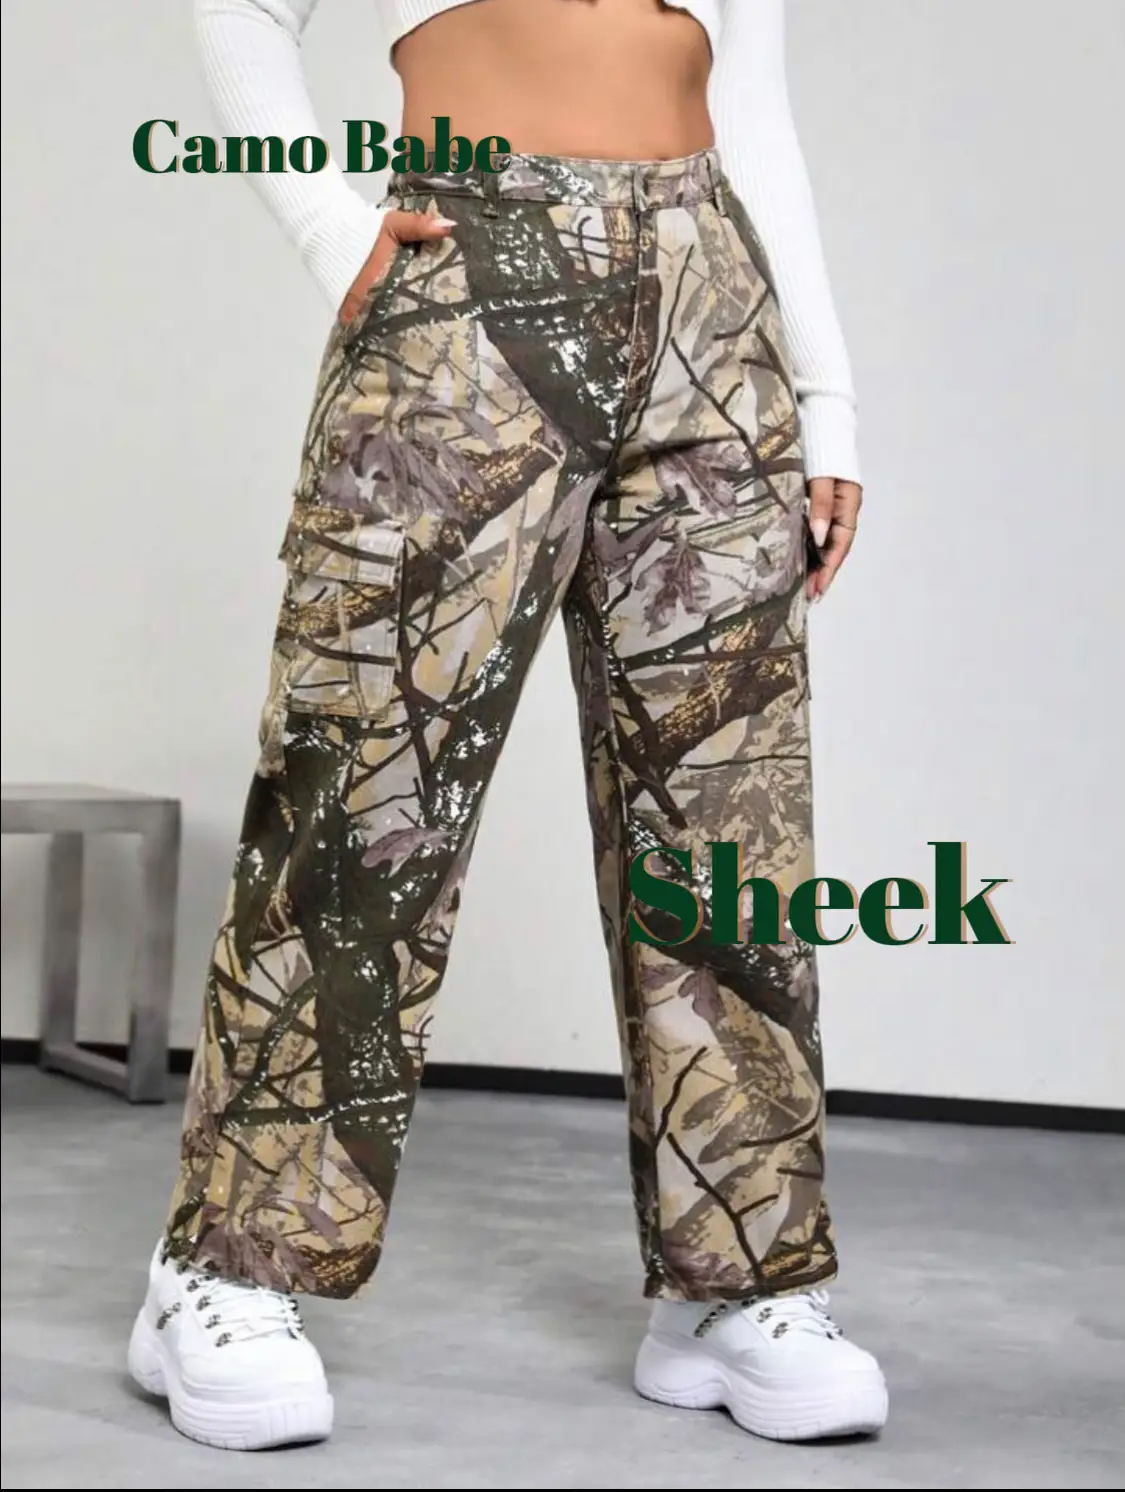 Wild Fable Camouflage Leggings, Women's Fashion, Bottoms, Other Bottoms on  Carousell